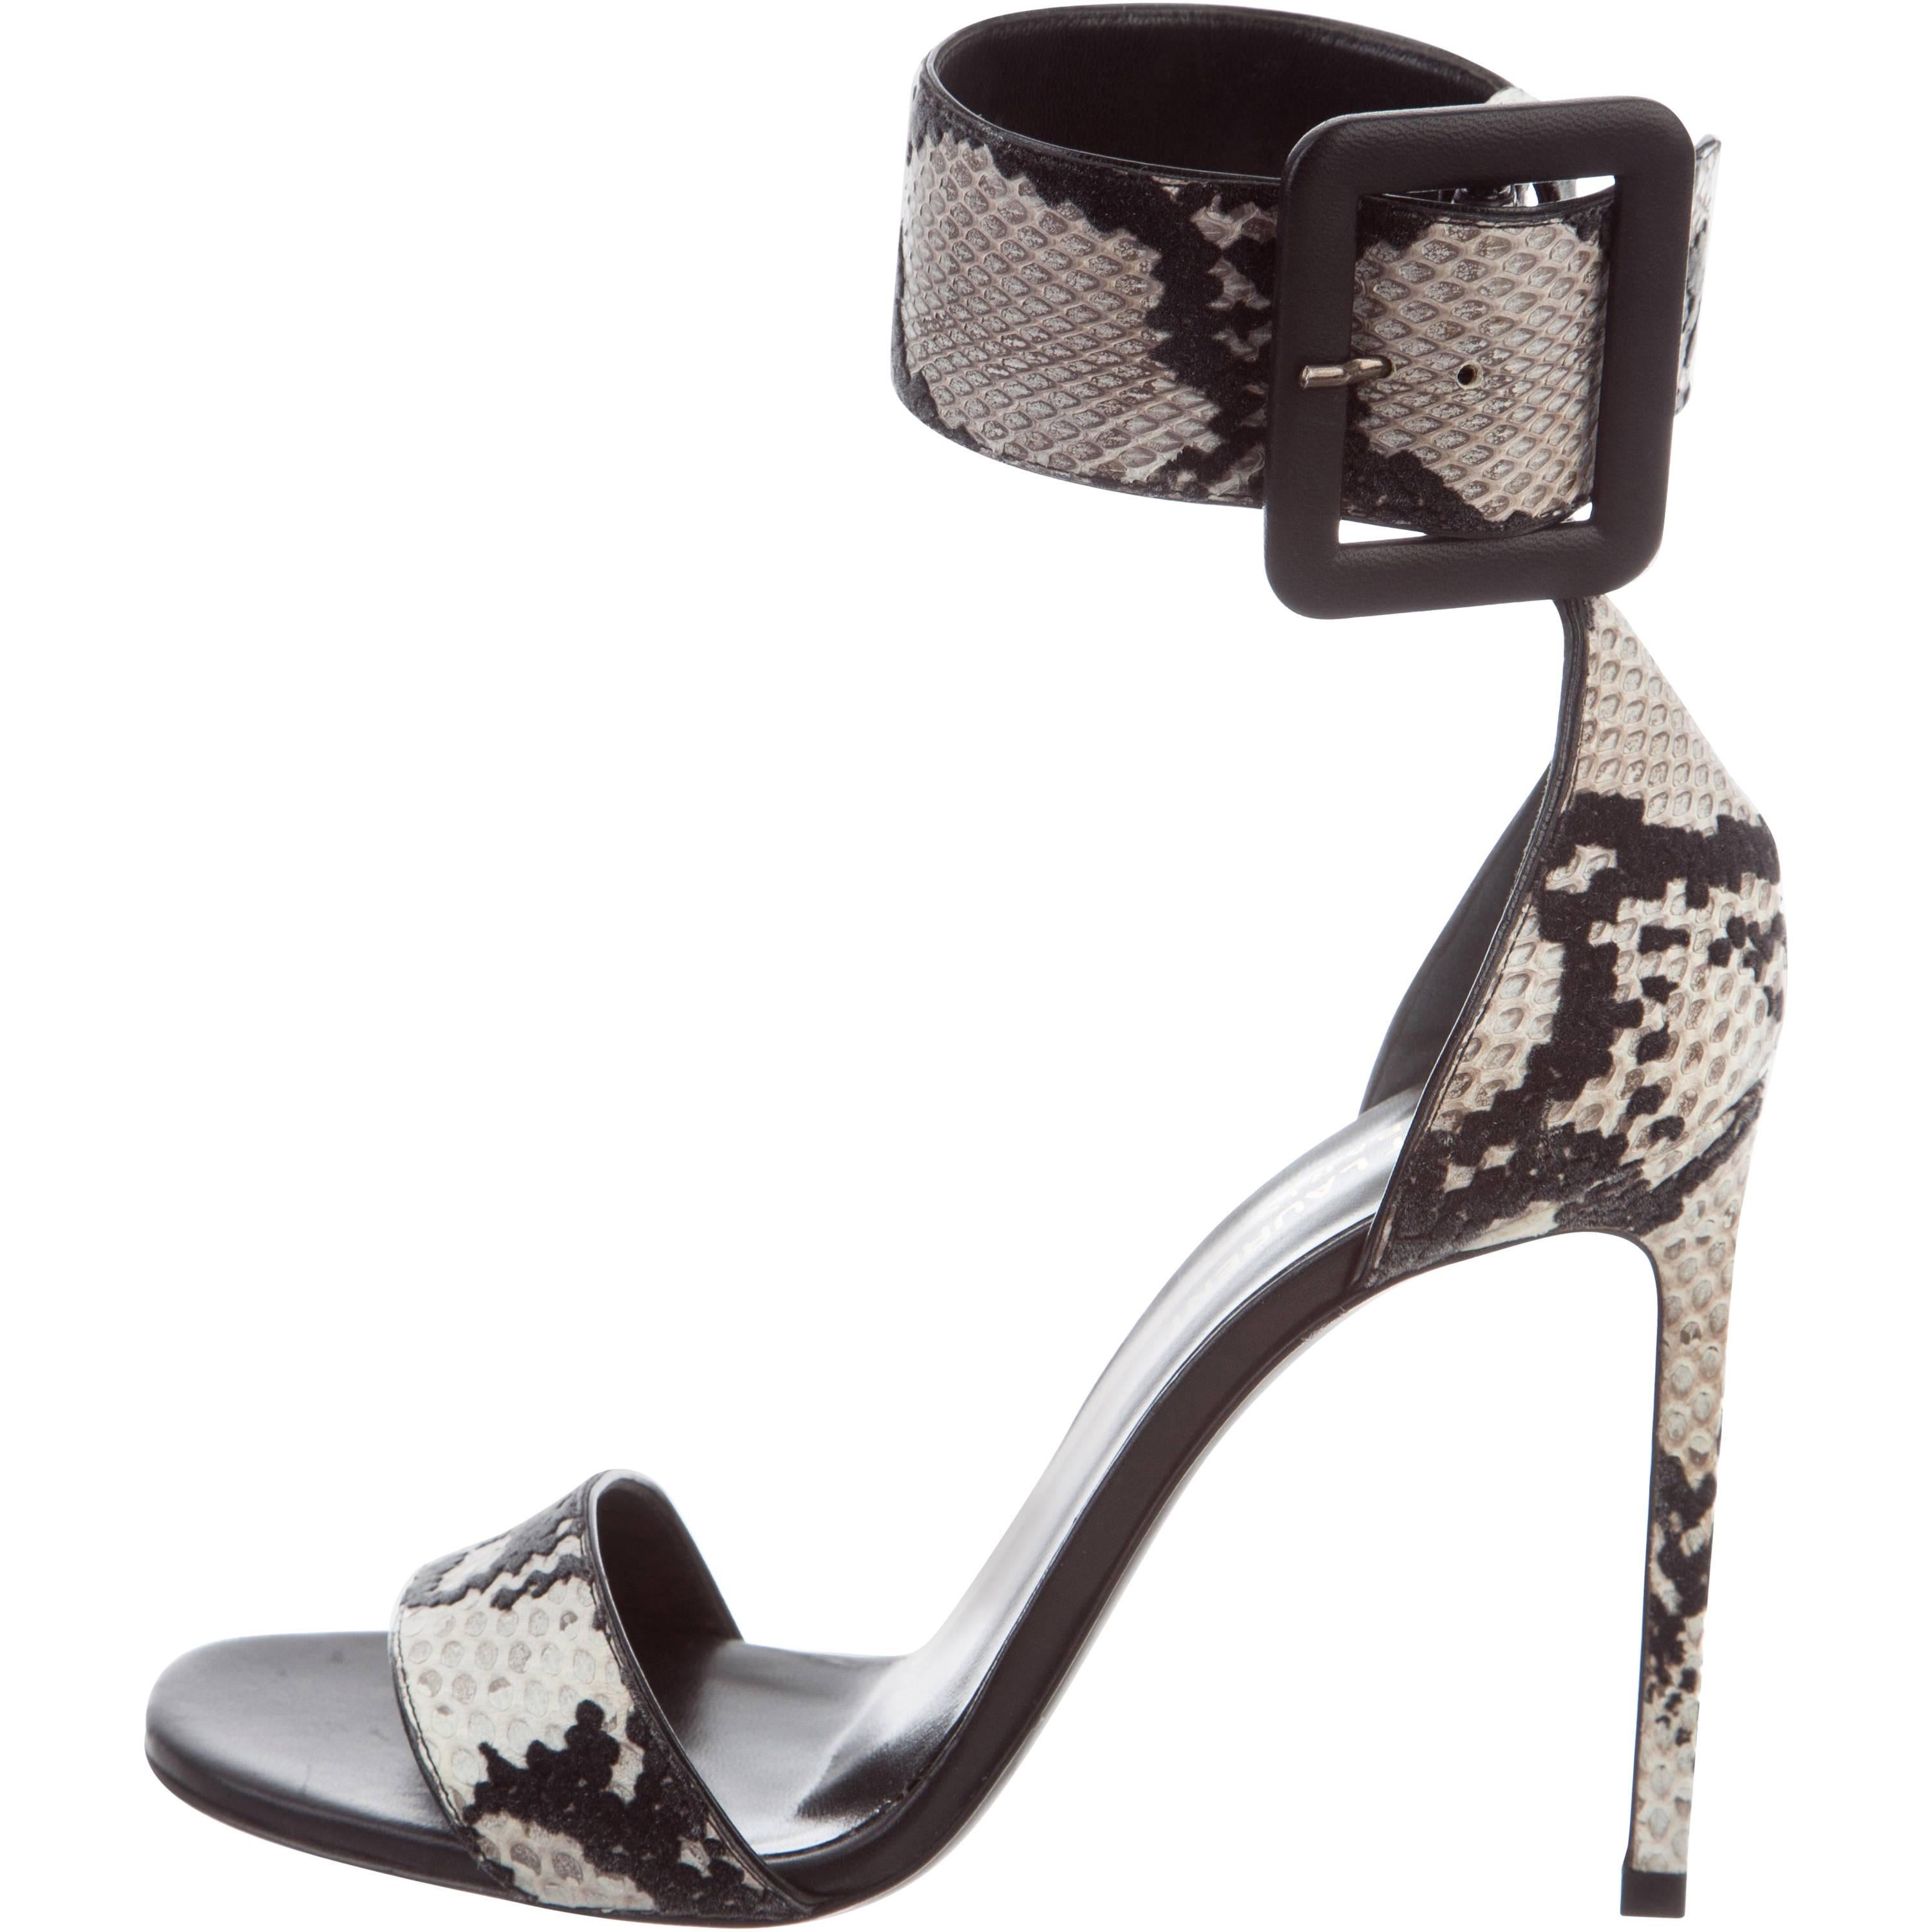 Givenchy NEW Black White Snakeskin Leather Gladiator Ankle Sandals Heels in Box